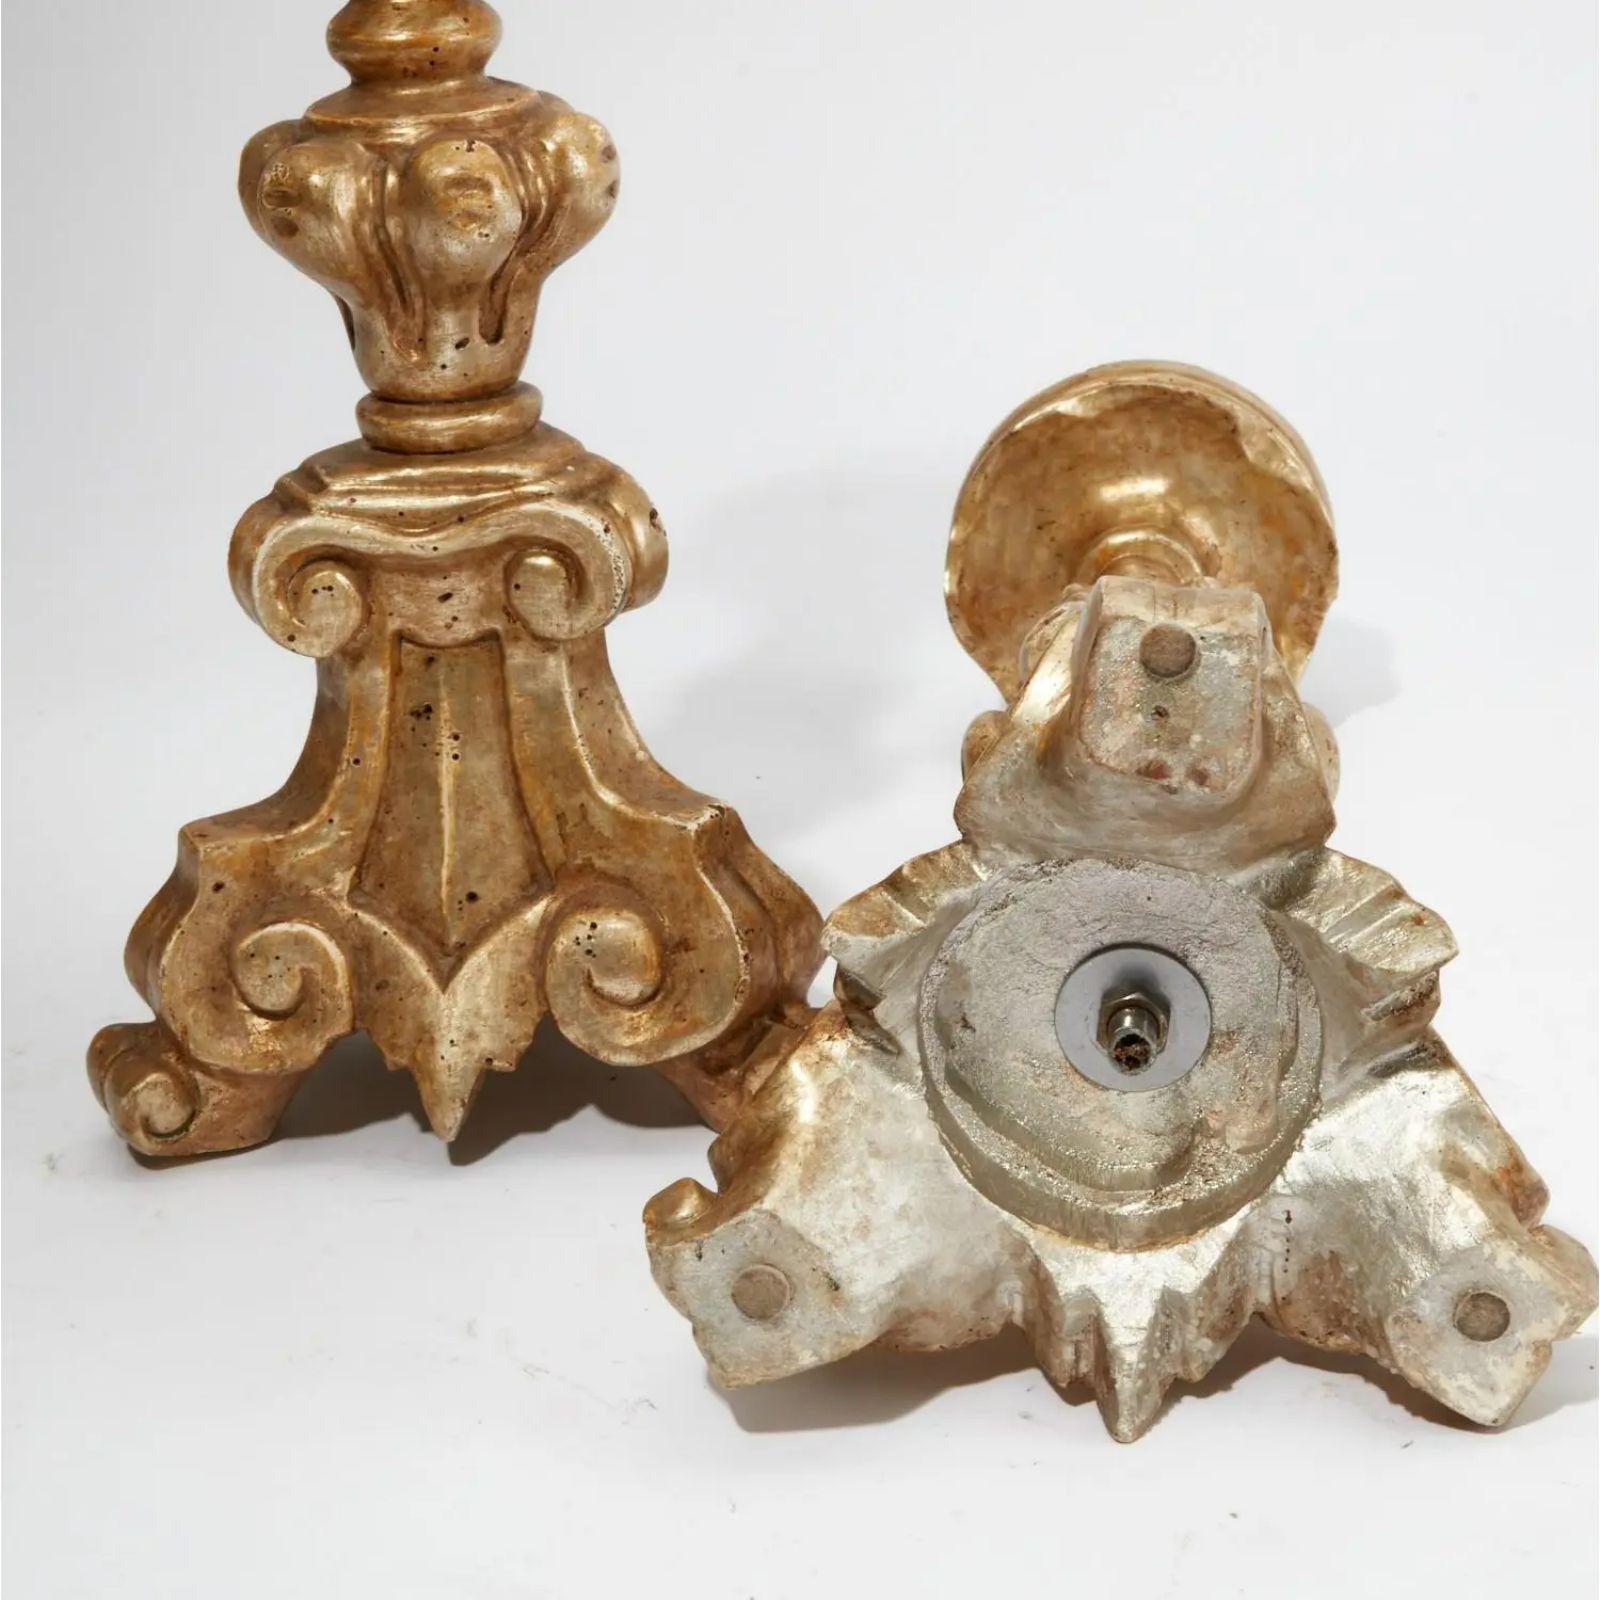 Pair of 18th century style Italian giltwood pricket candlesticks. Each by Thomas Morgan and features genuine white gold gilded finish on hand carved wood.

Additional information: 
Materials: Giltwood
Color: Silver
Period: 2000 - 2009
Styles: